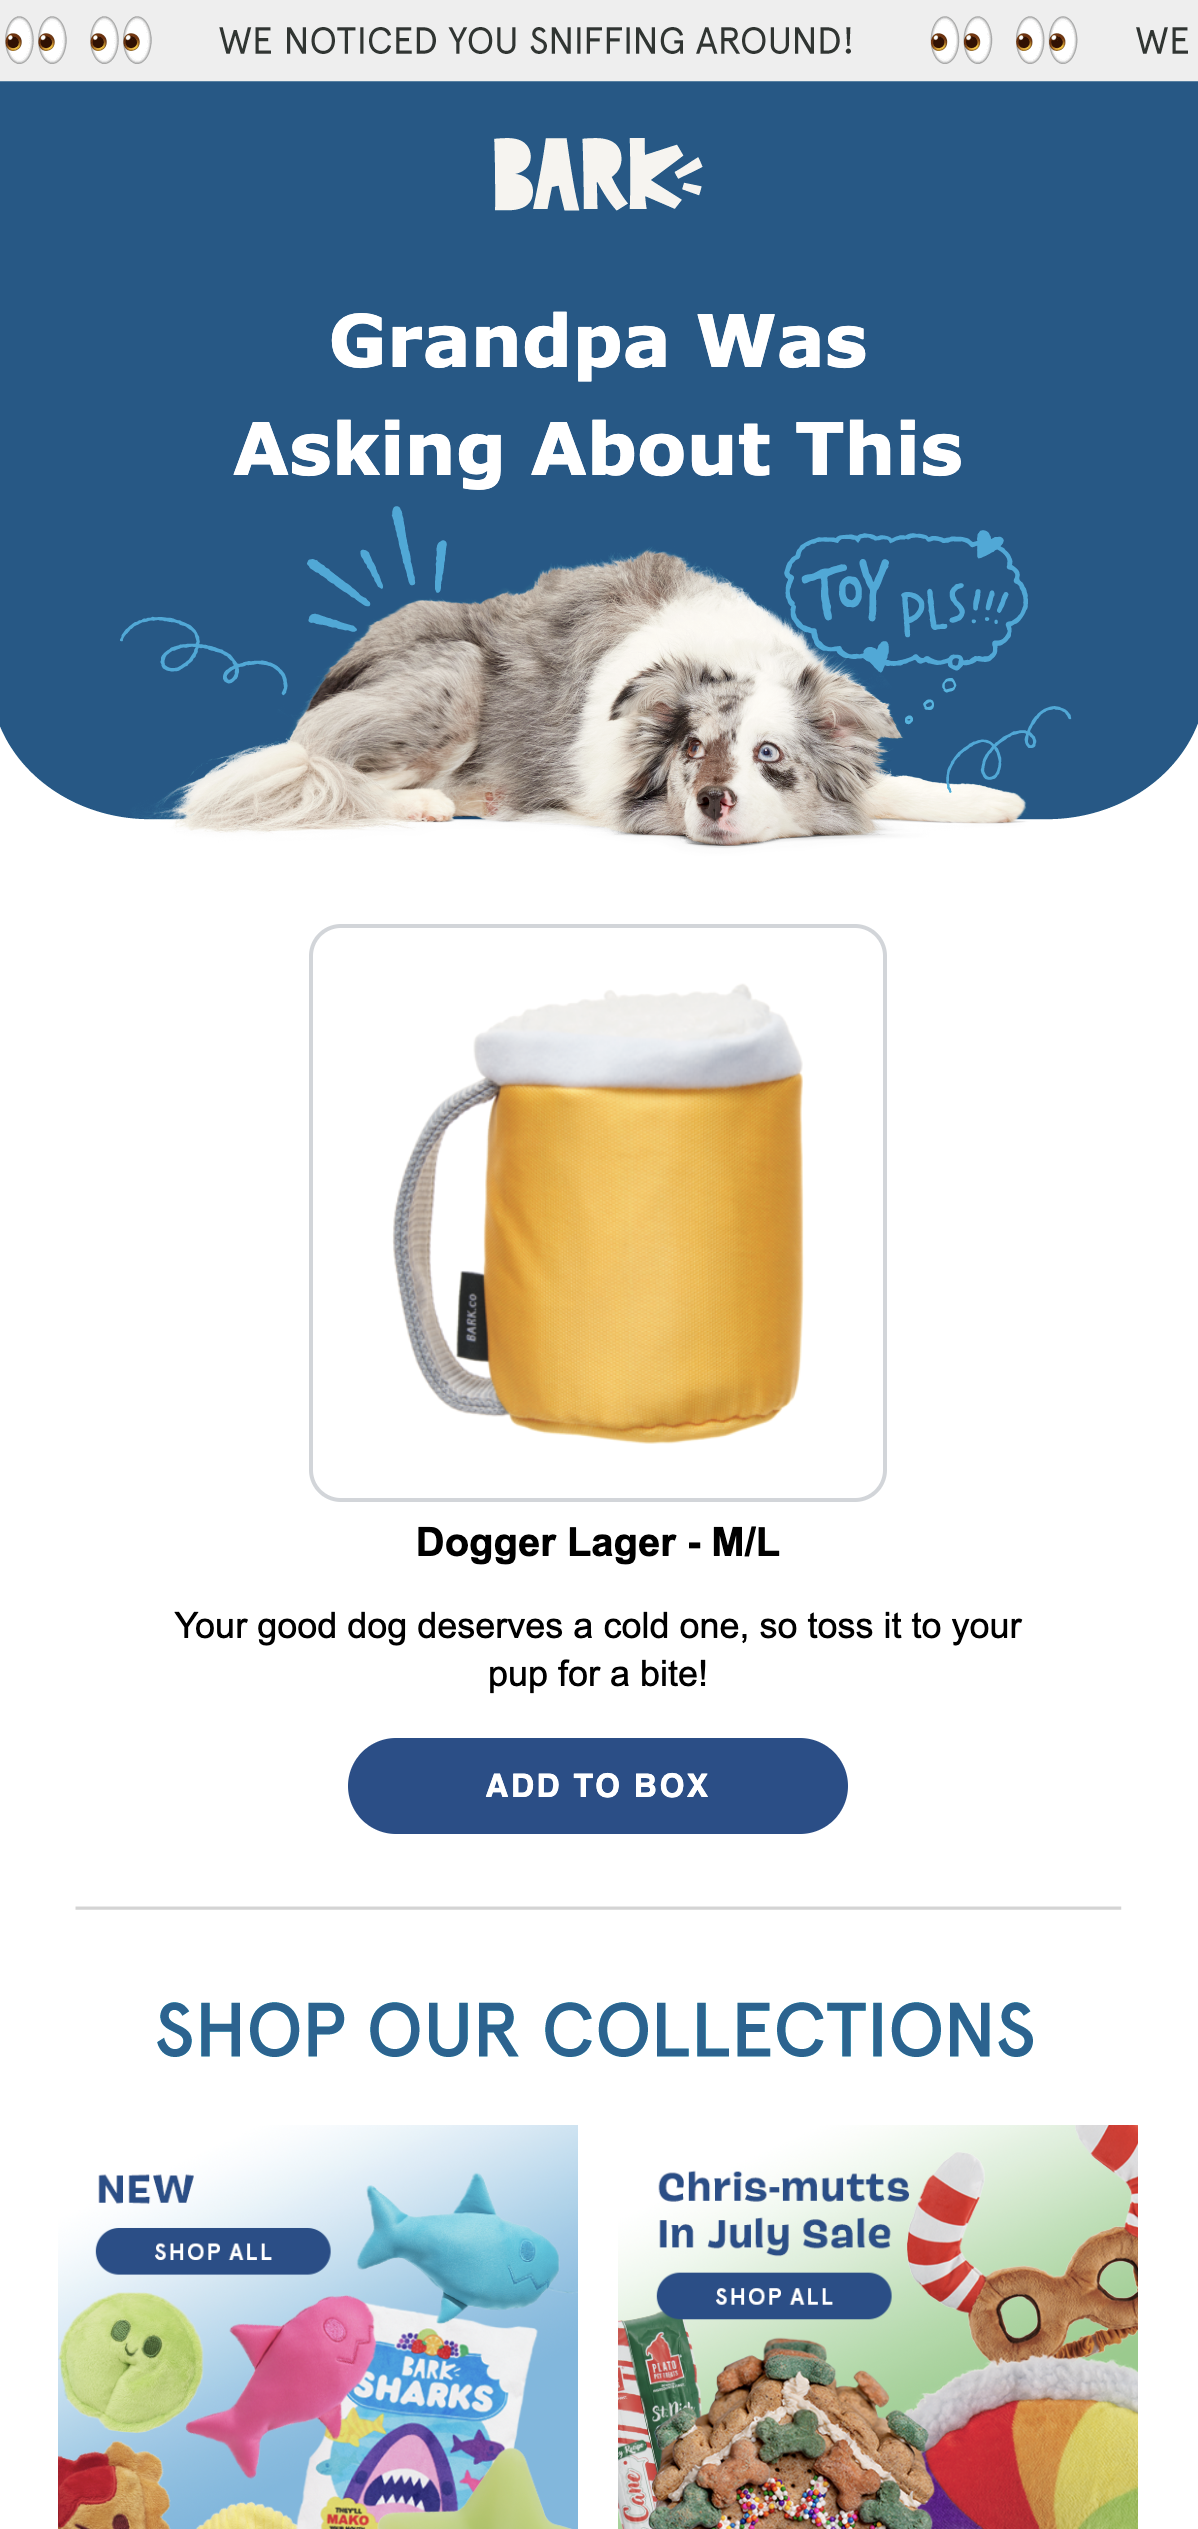 Abandoned cart email from Bark! featuring a plush toy resembling a mug of beer and the header Grandpa Was Asking About This.